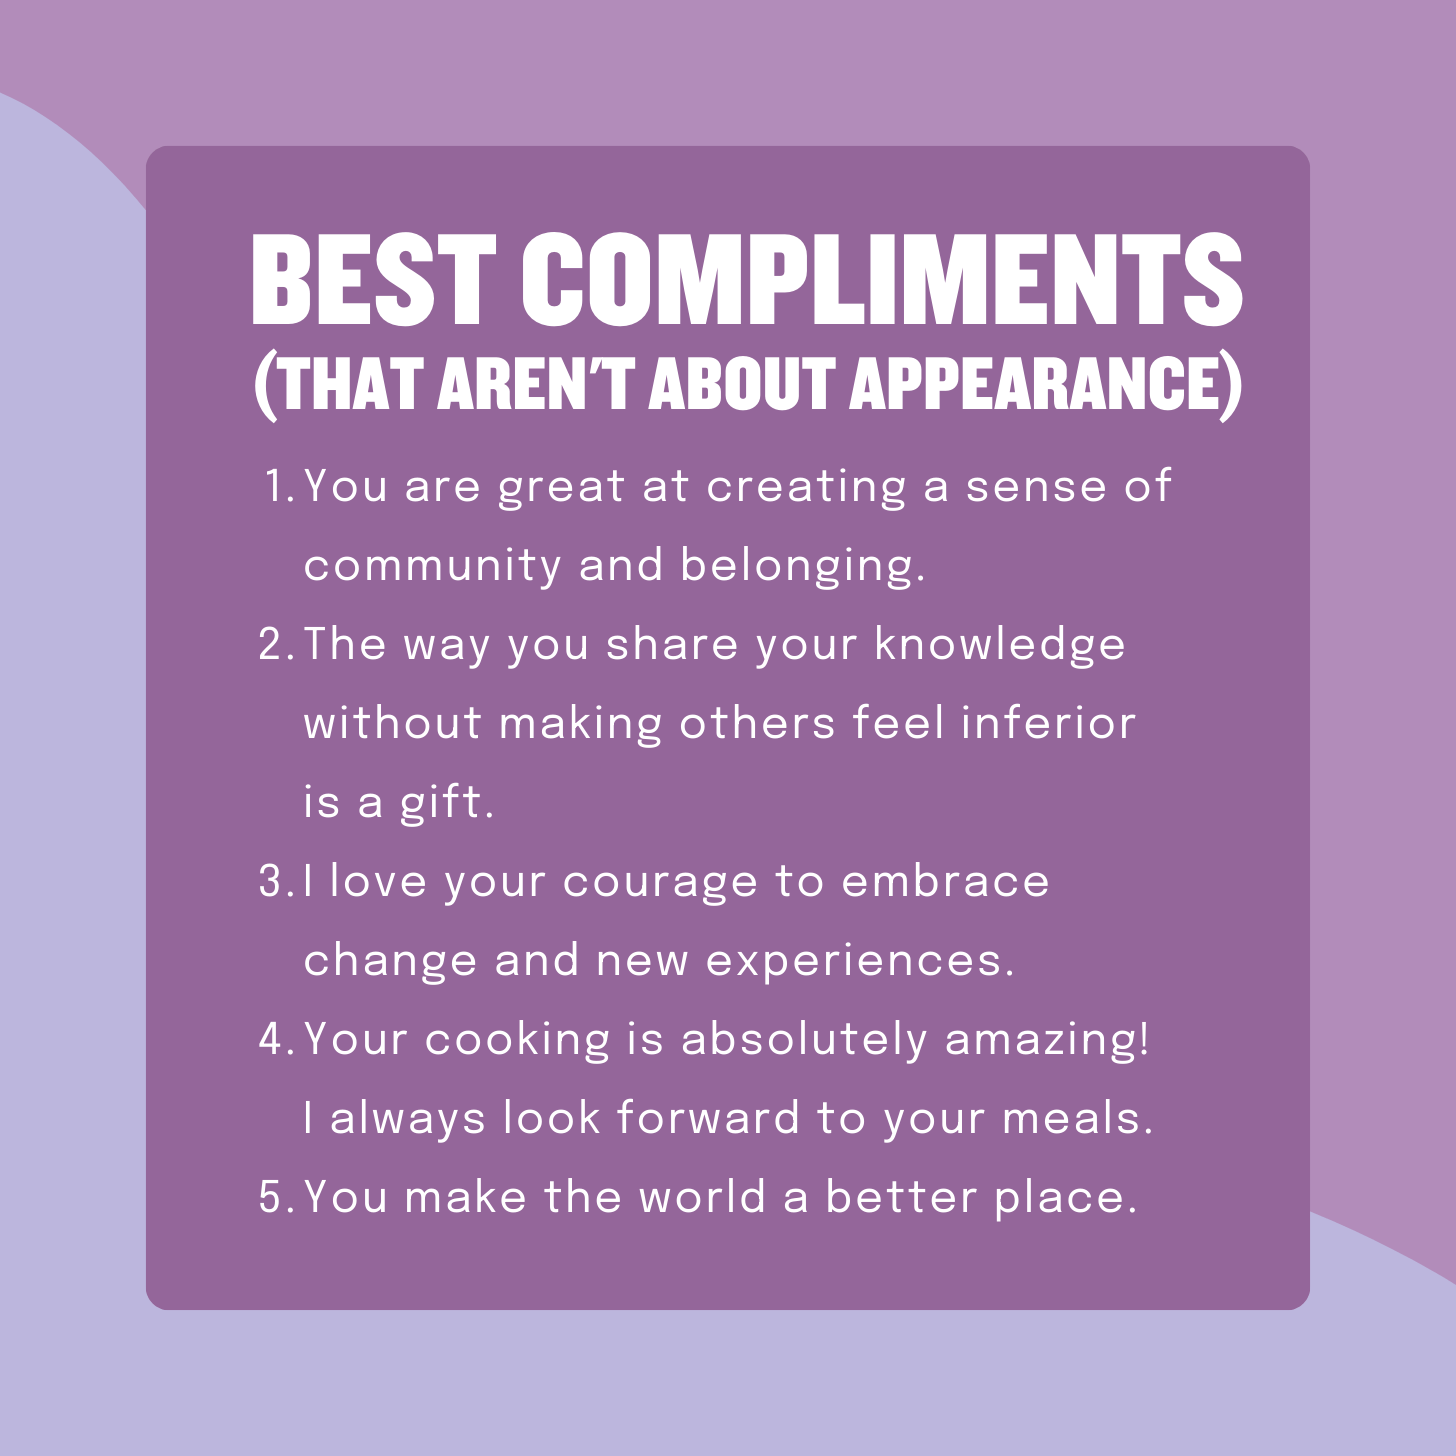 Best Compliments That Aren't About Appearance: 1. You are great at creating a sense of community and belonging. 2. The way you share your knowledge without making others feel inferior is a gift. 3. I love your courage to embrace change and new experiences. 4. Your cooking is absolutely amazing! I always look forward to your meals. 5. You make the world a better place.